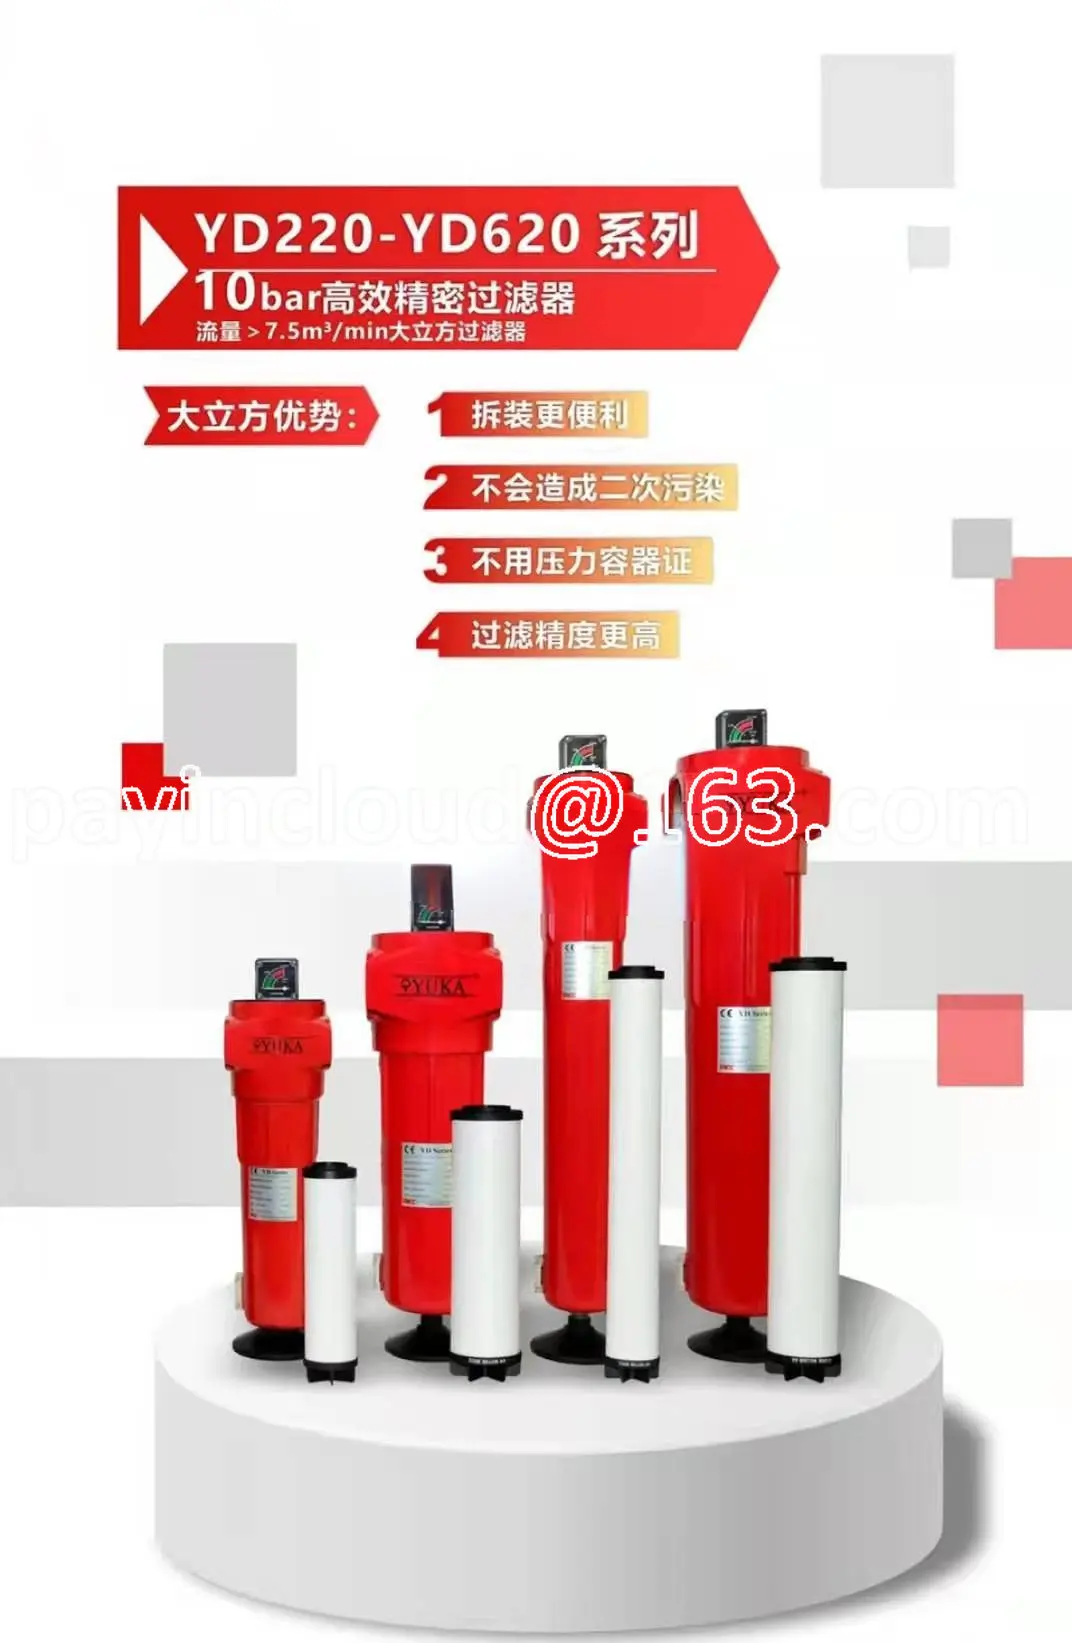 

Compressed Air Precision Filter, Air Compressor Degreasing Pipeline Filter, Oil-water Separator